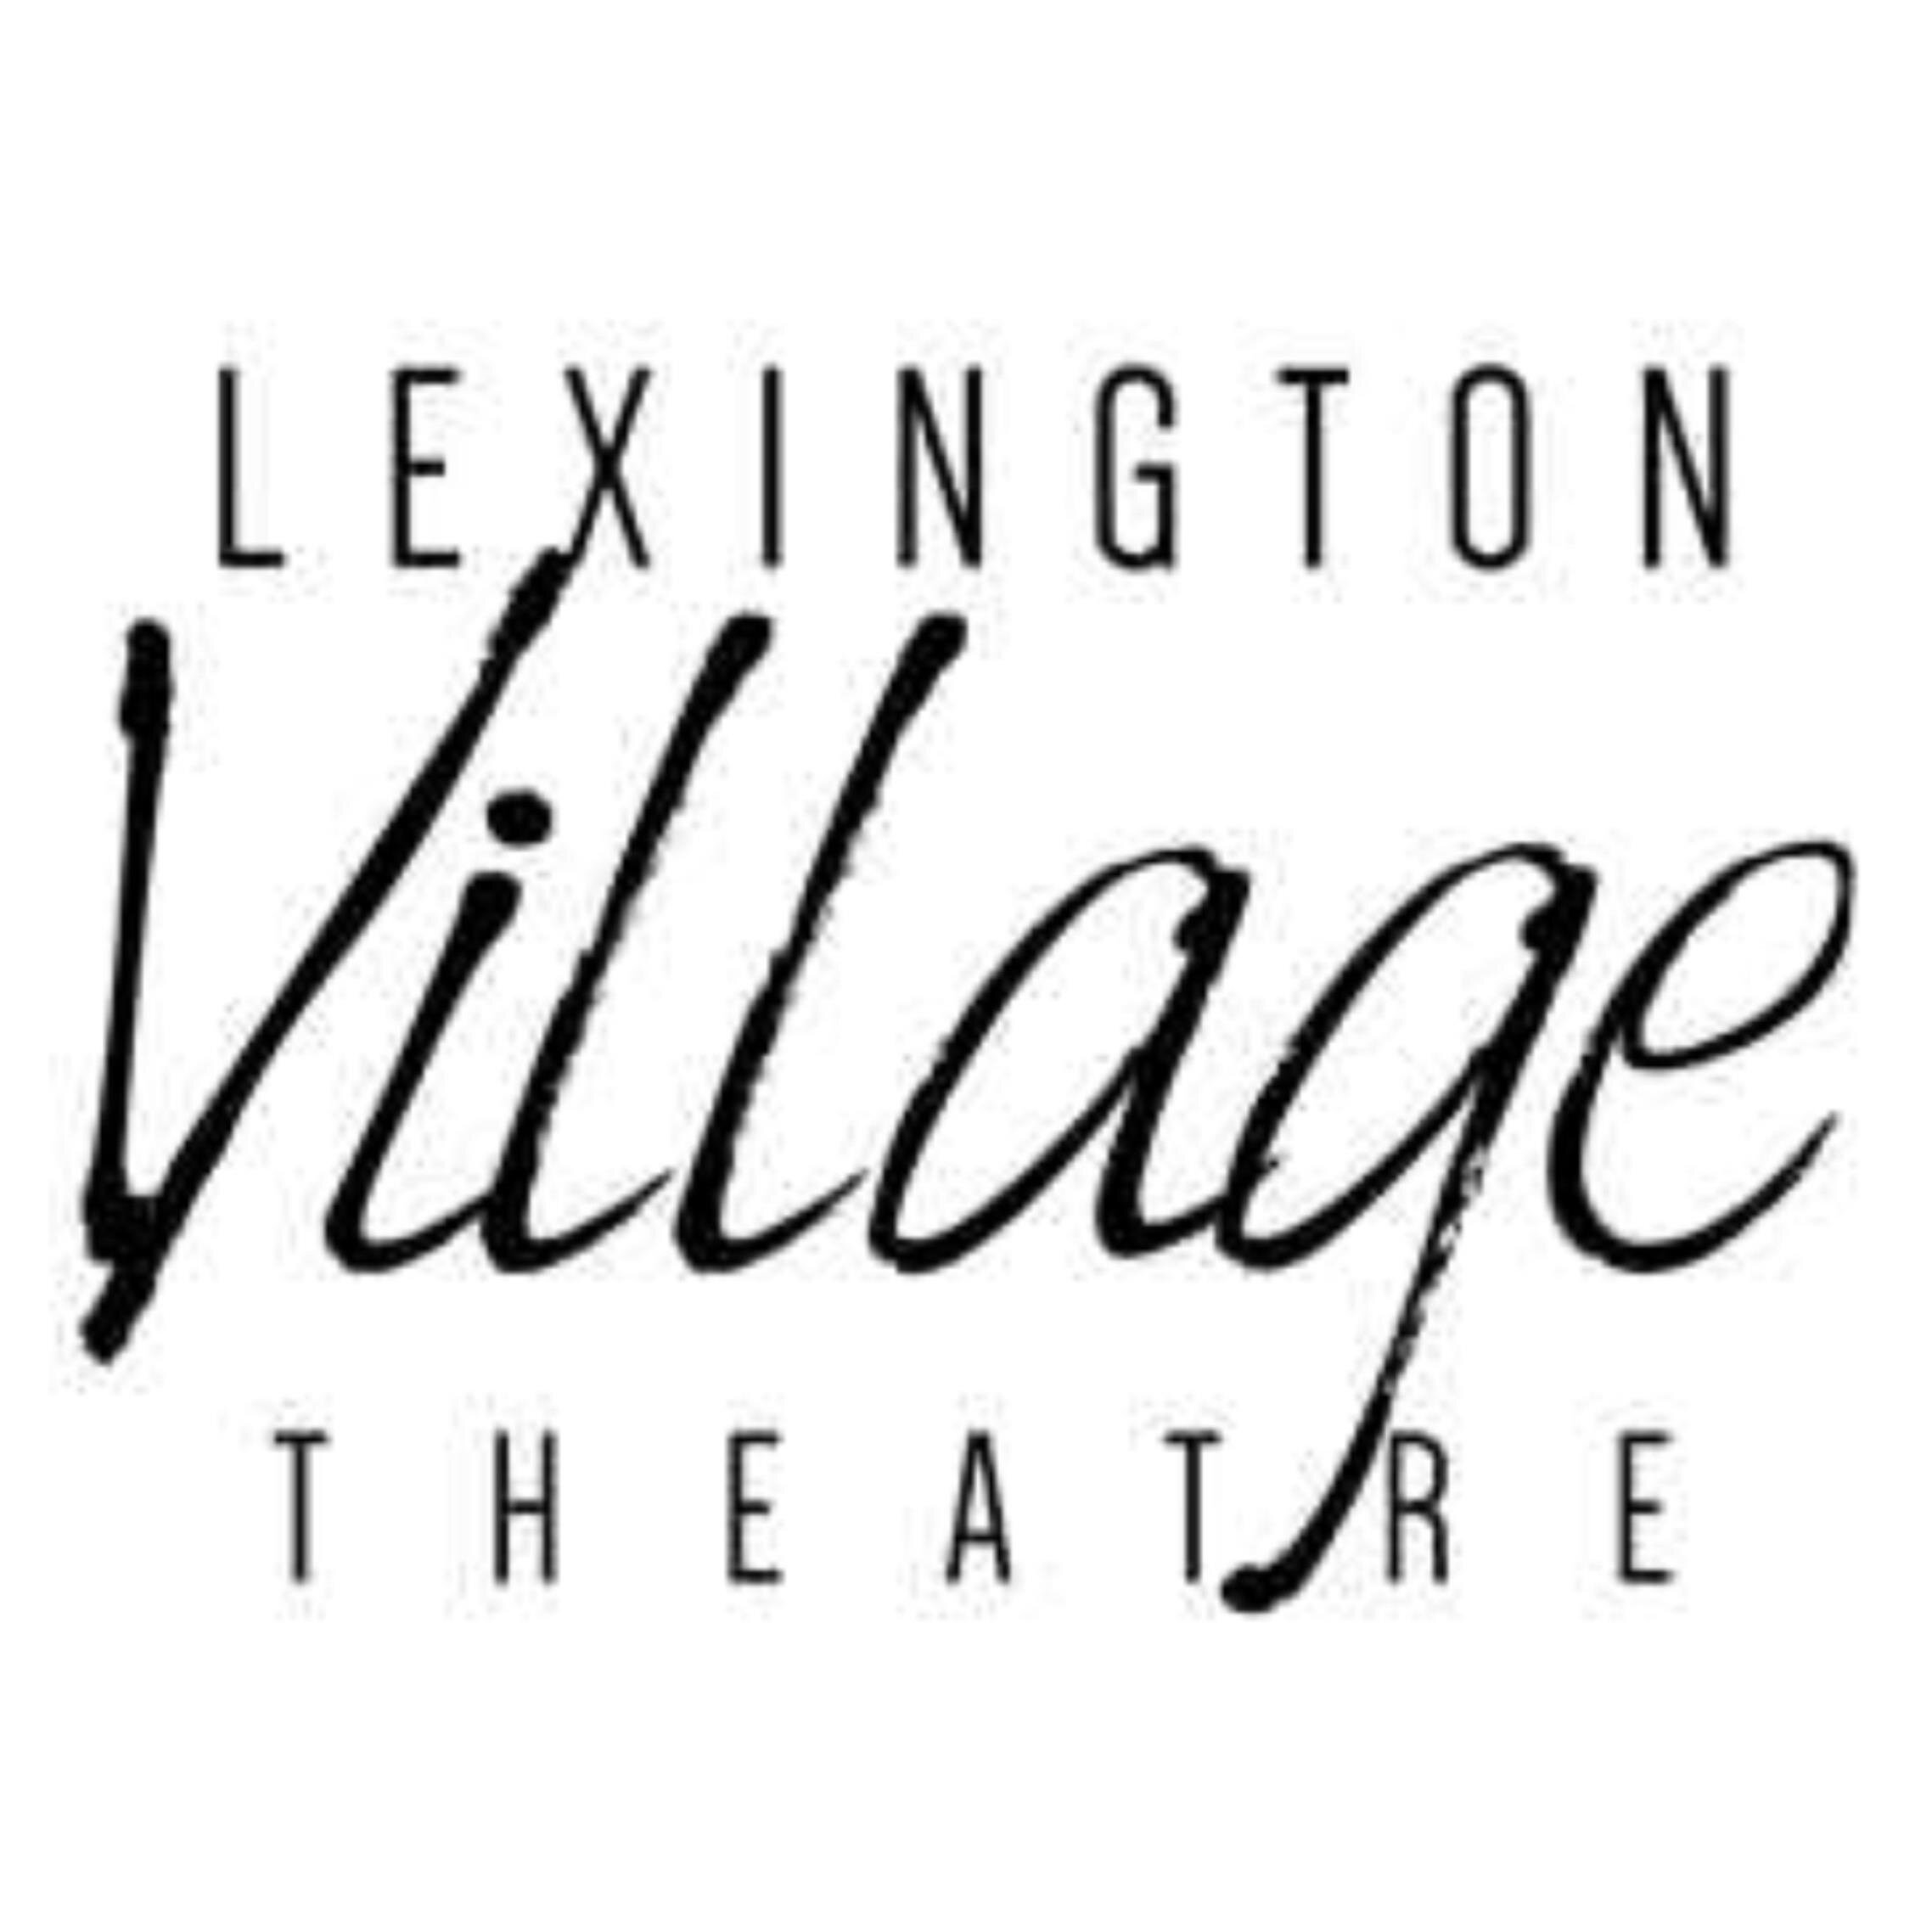 Lexington Village Theatre is billed as The Premiere Performance Venue, committed to bringing world class entertainment to the Blue Water Area.